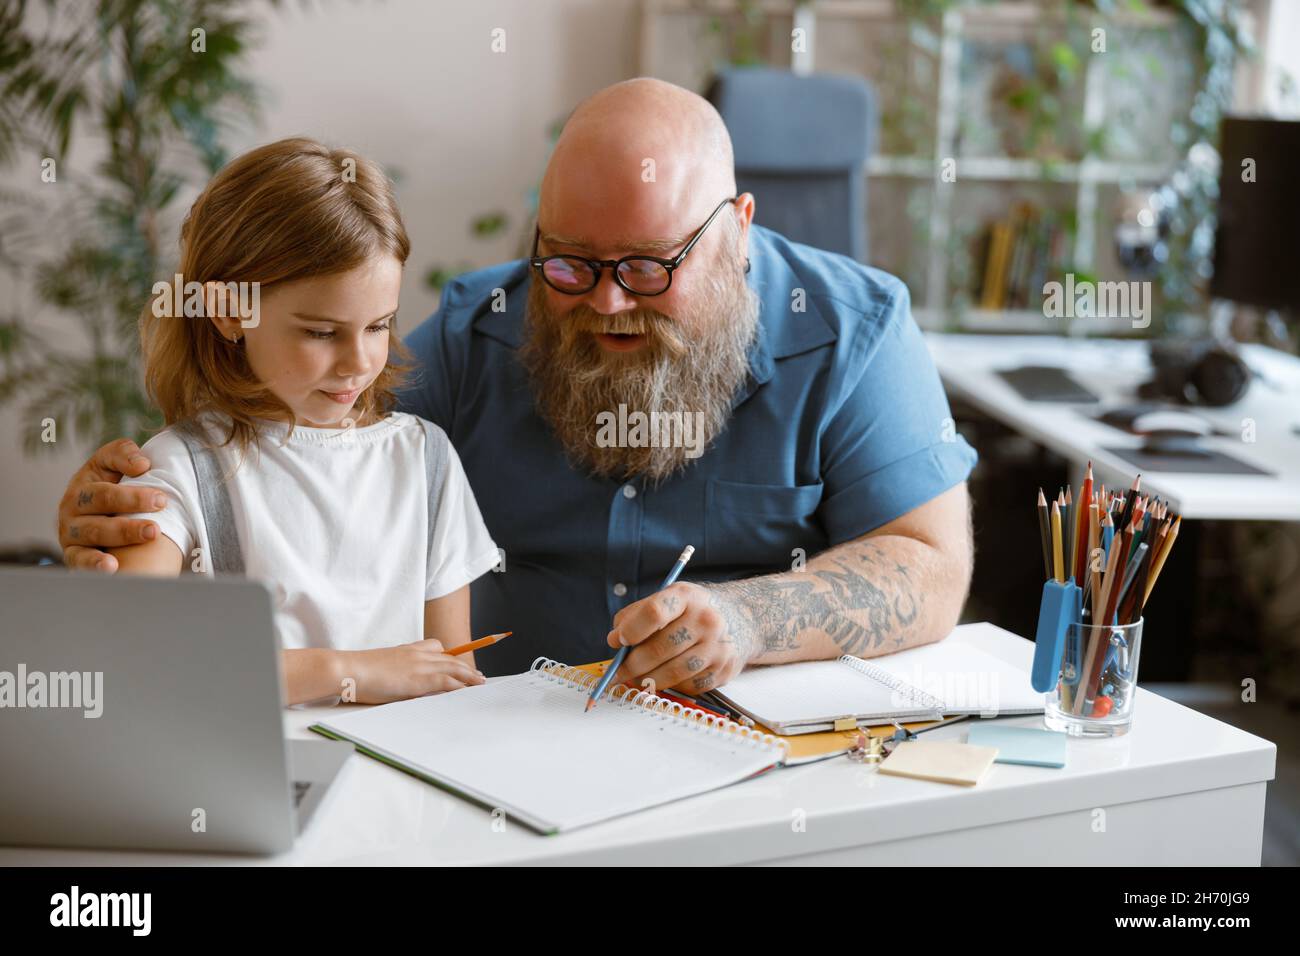 Careful daddy explains task to little daughter at table during video lesson in room Stock Photo